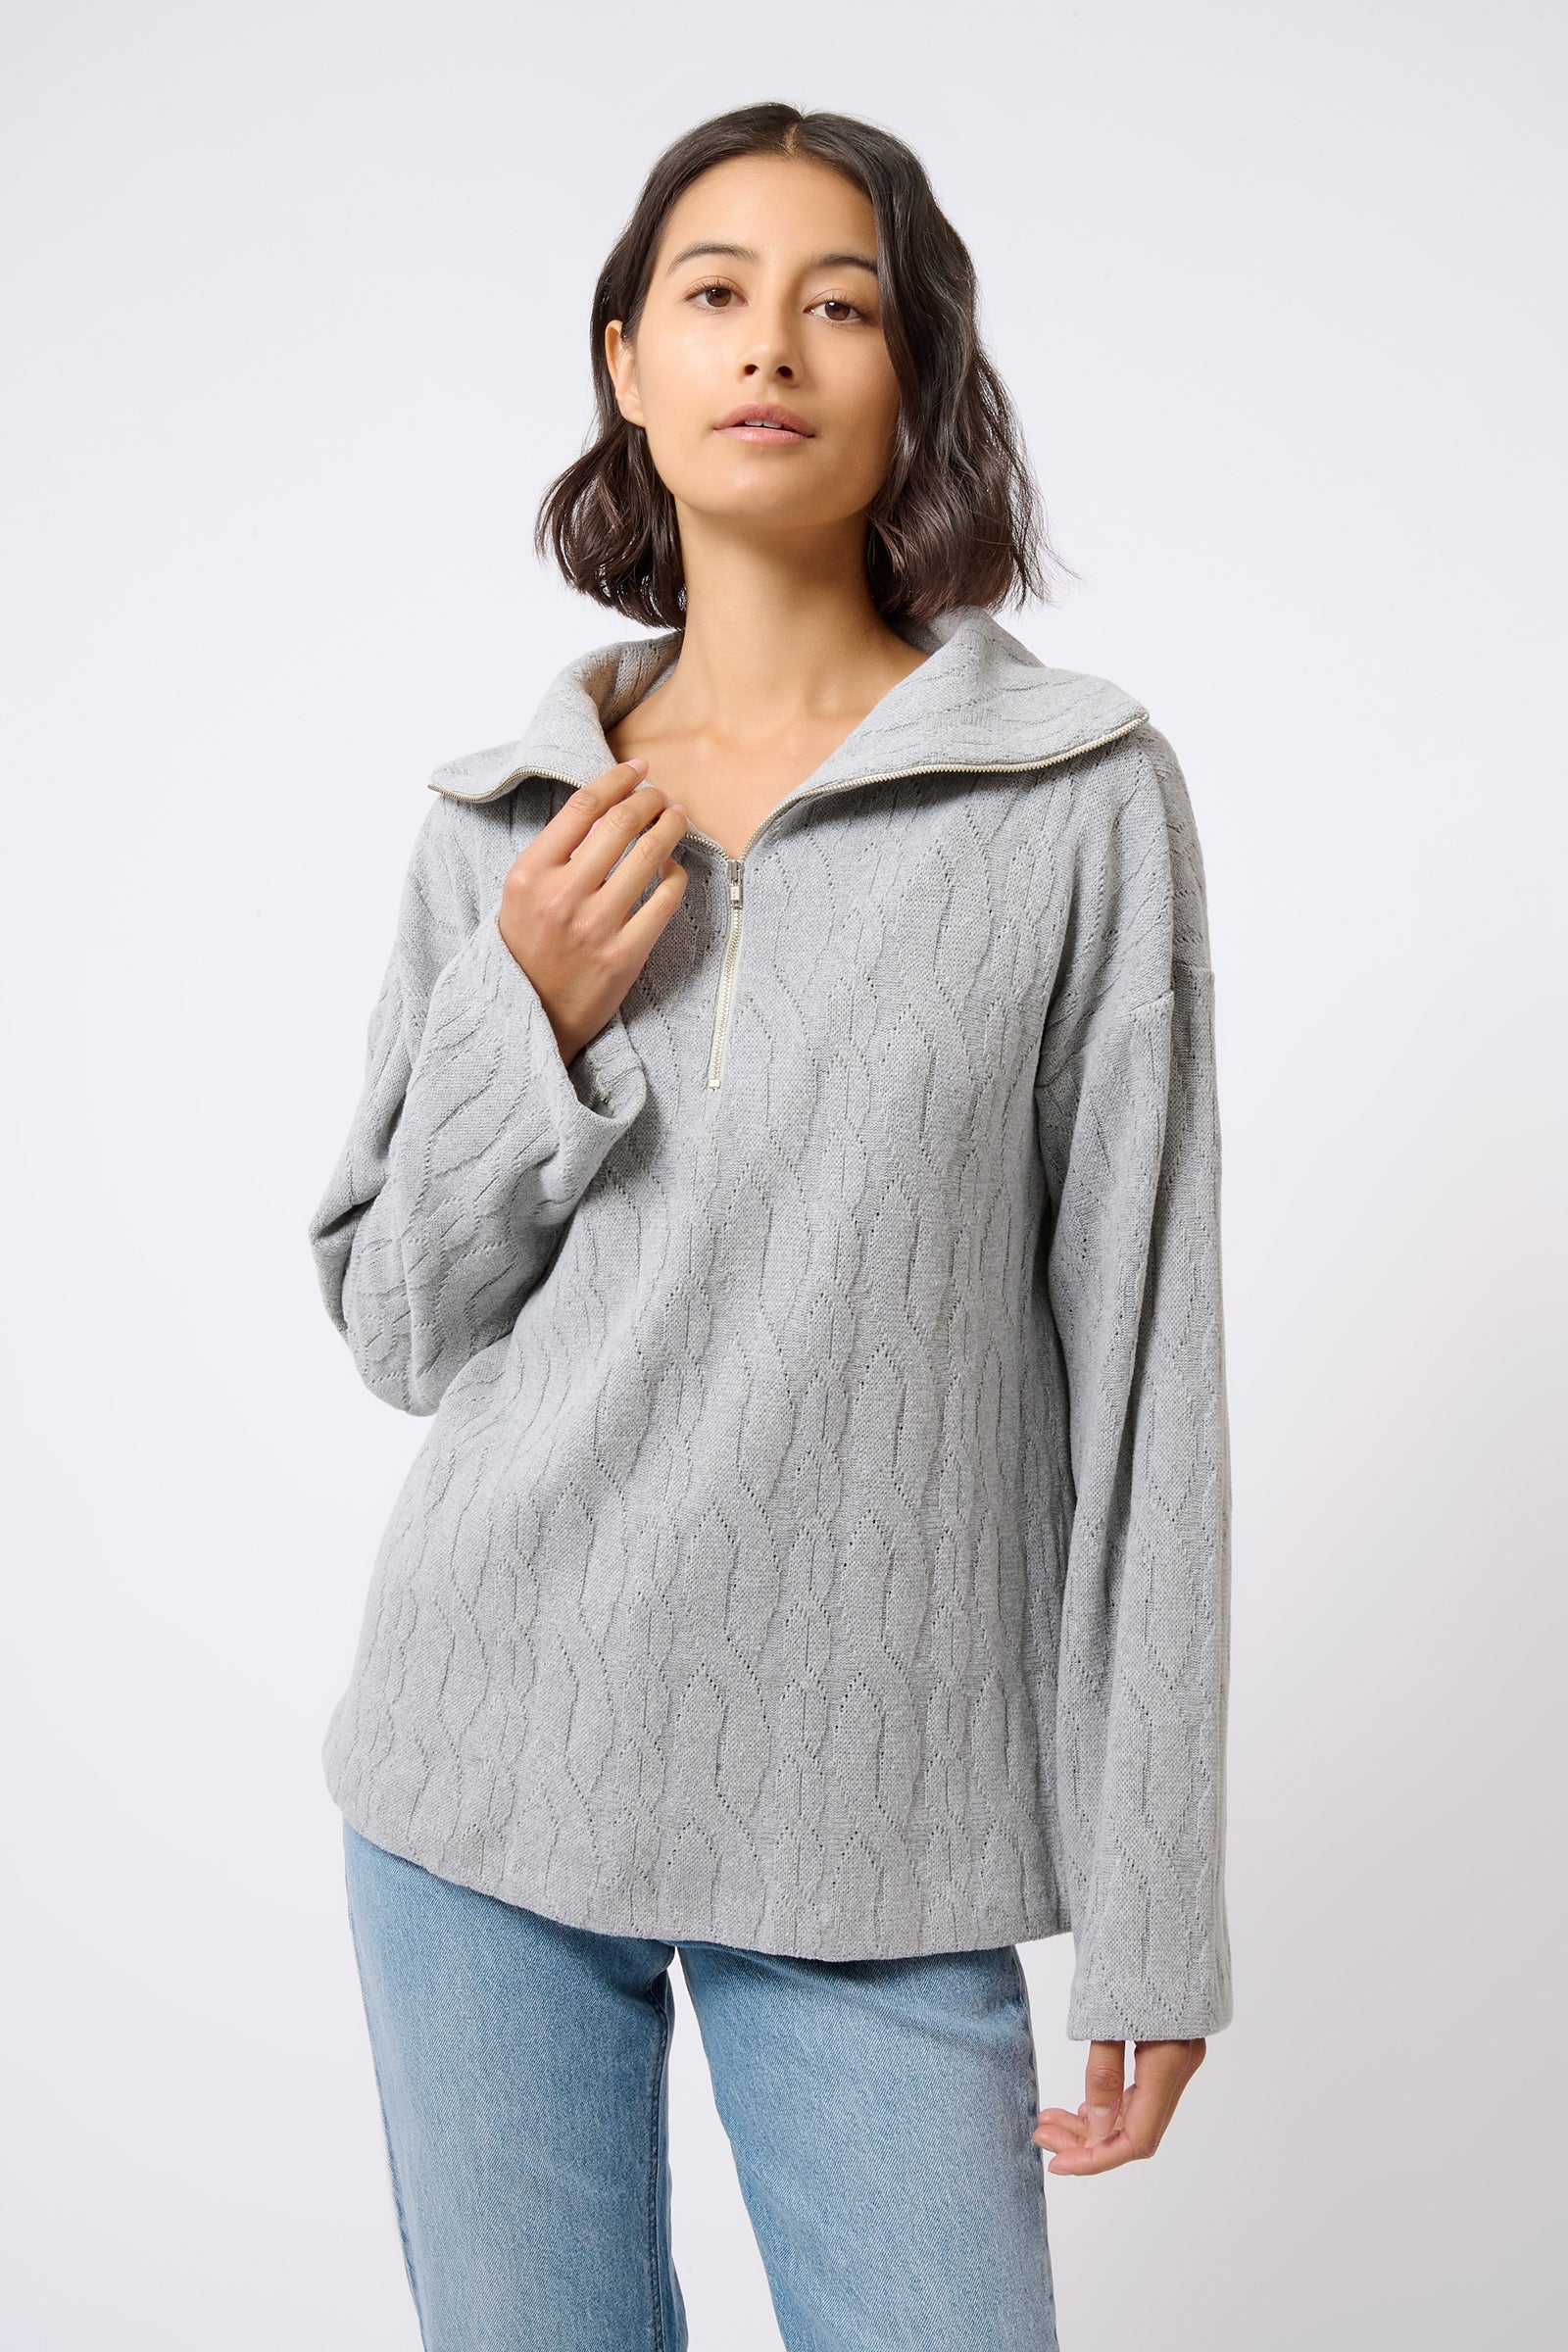 Kal Rieman Sandra Collared Zip Pullover Cable Knit in Grey on Model with Hand on Collar Front View